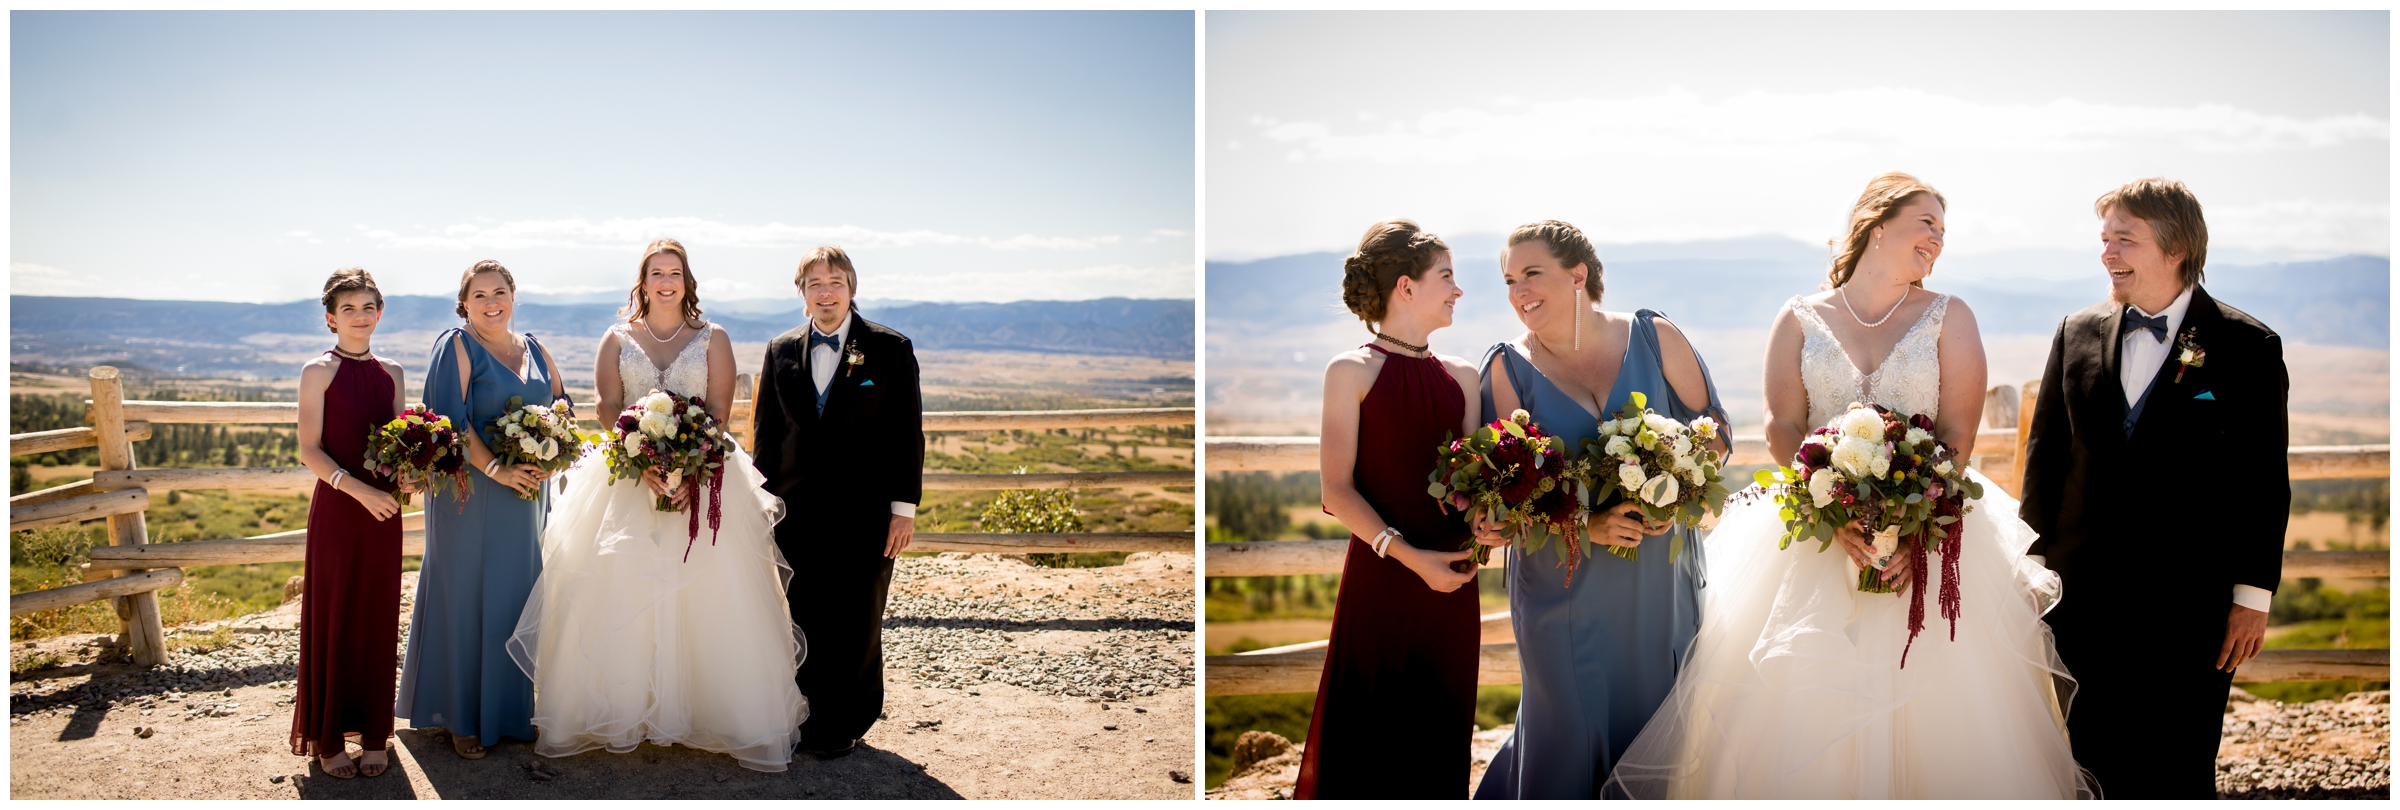 bridesmaids in blue and burgundy dresses at Colorado wedding